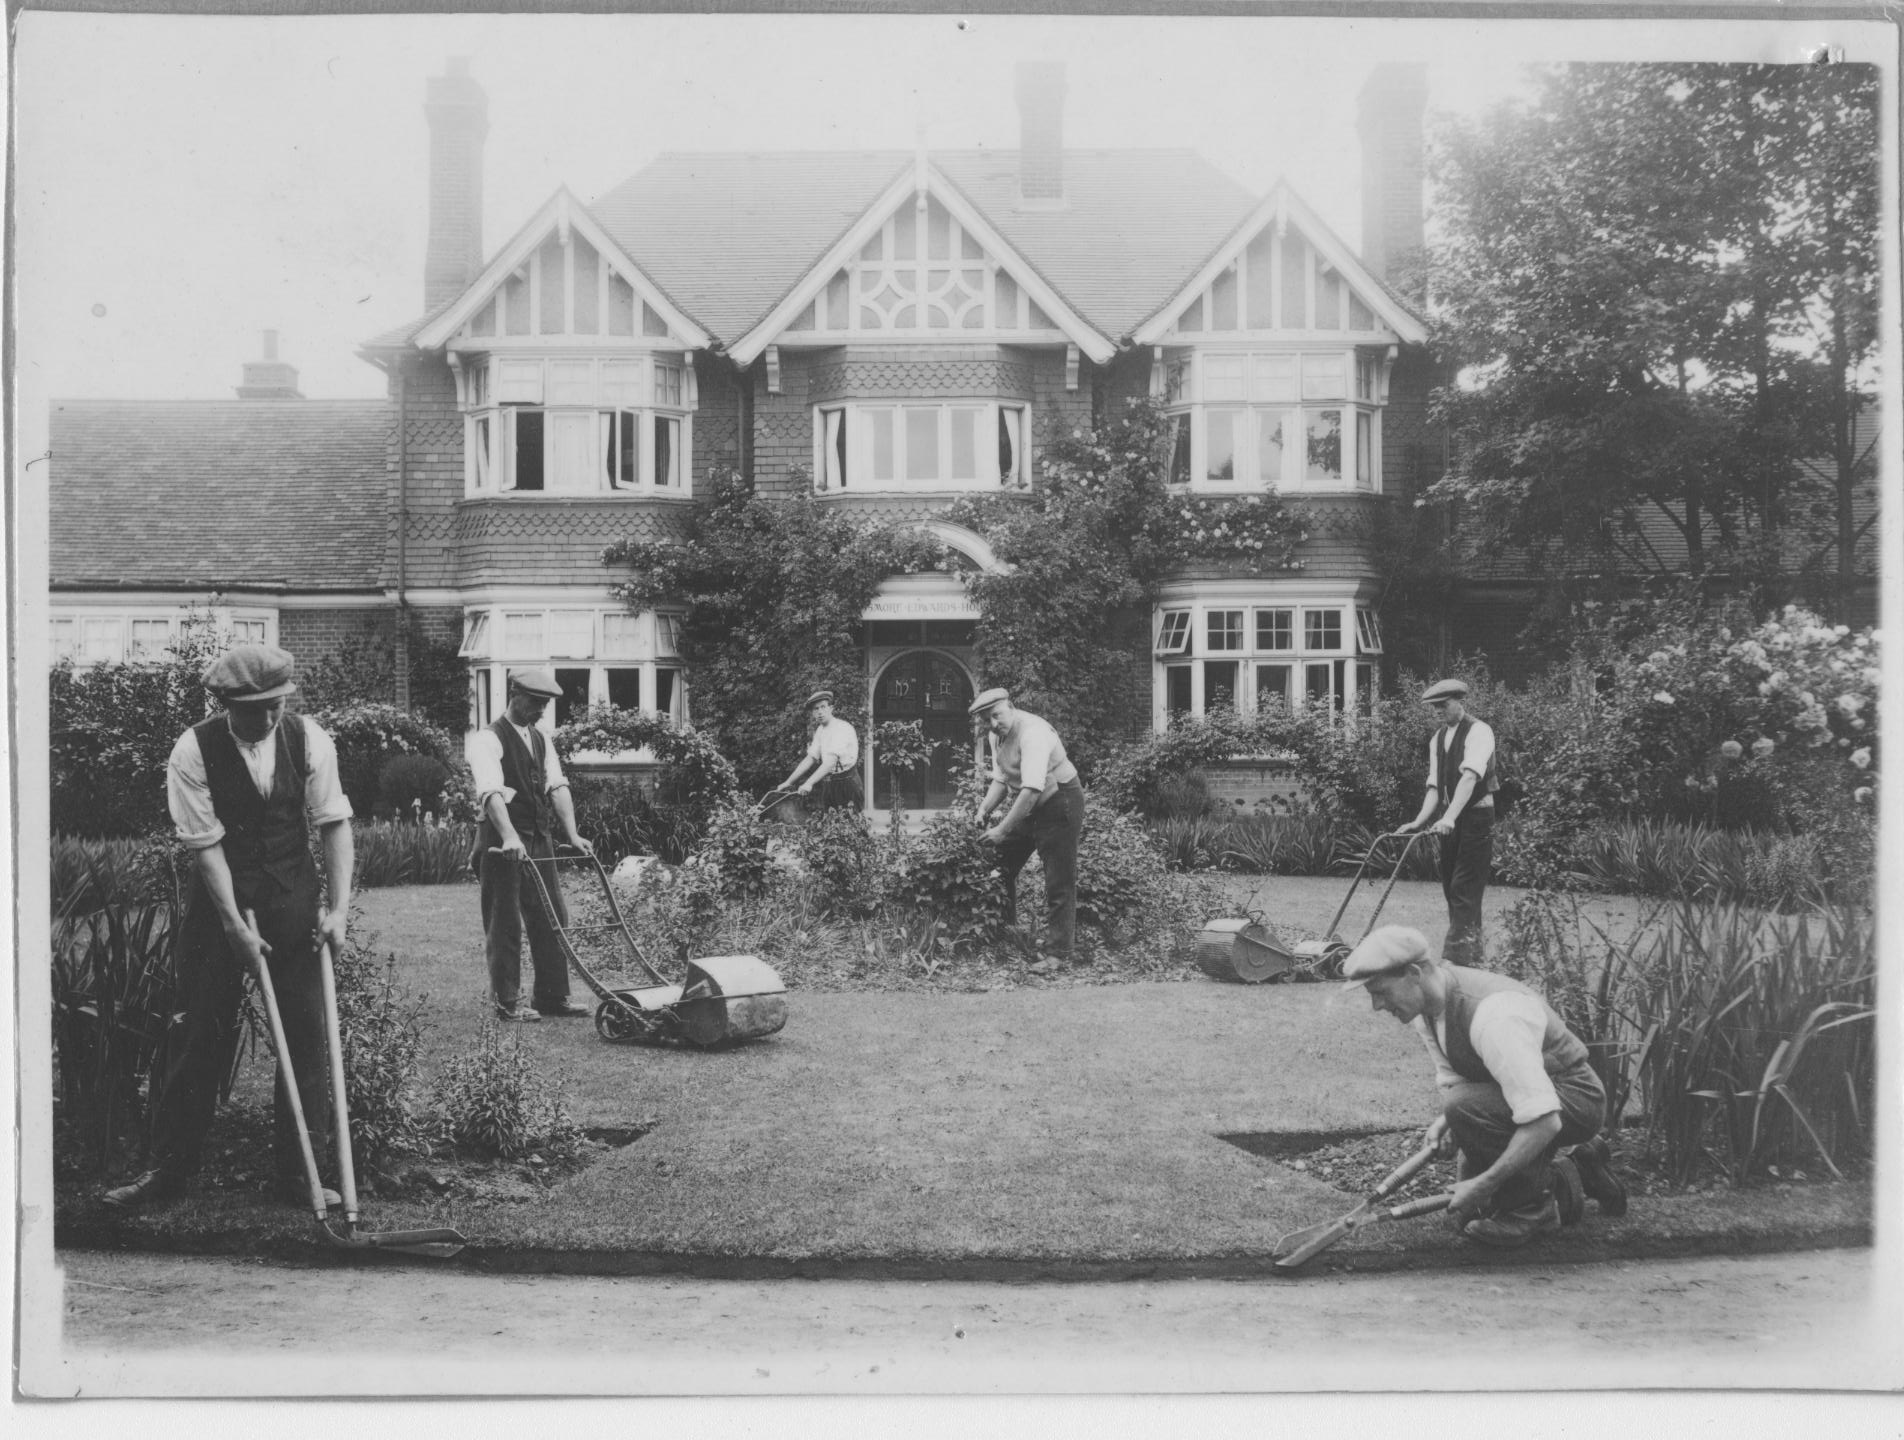 Passmore Edwards House circa 1920s with a team of gardeners mowing the grass. The Victorian-style house is covered in climbing shrubs